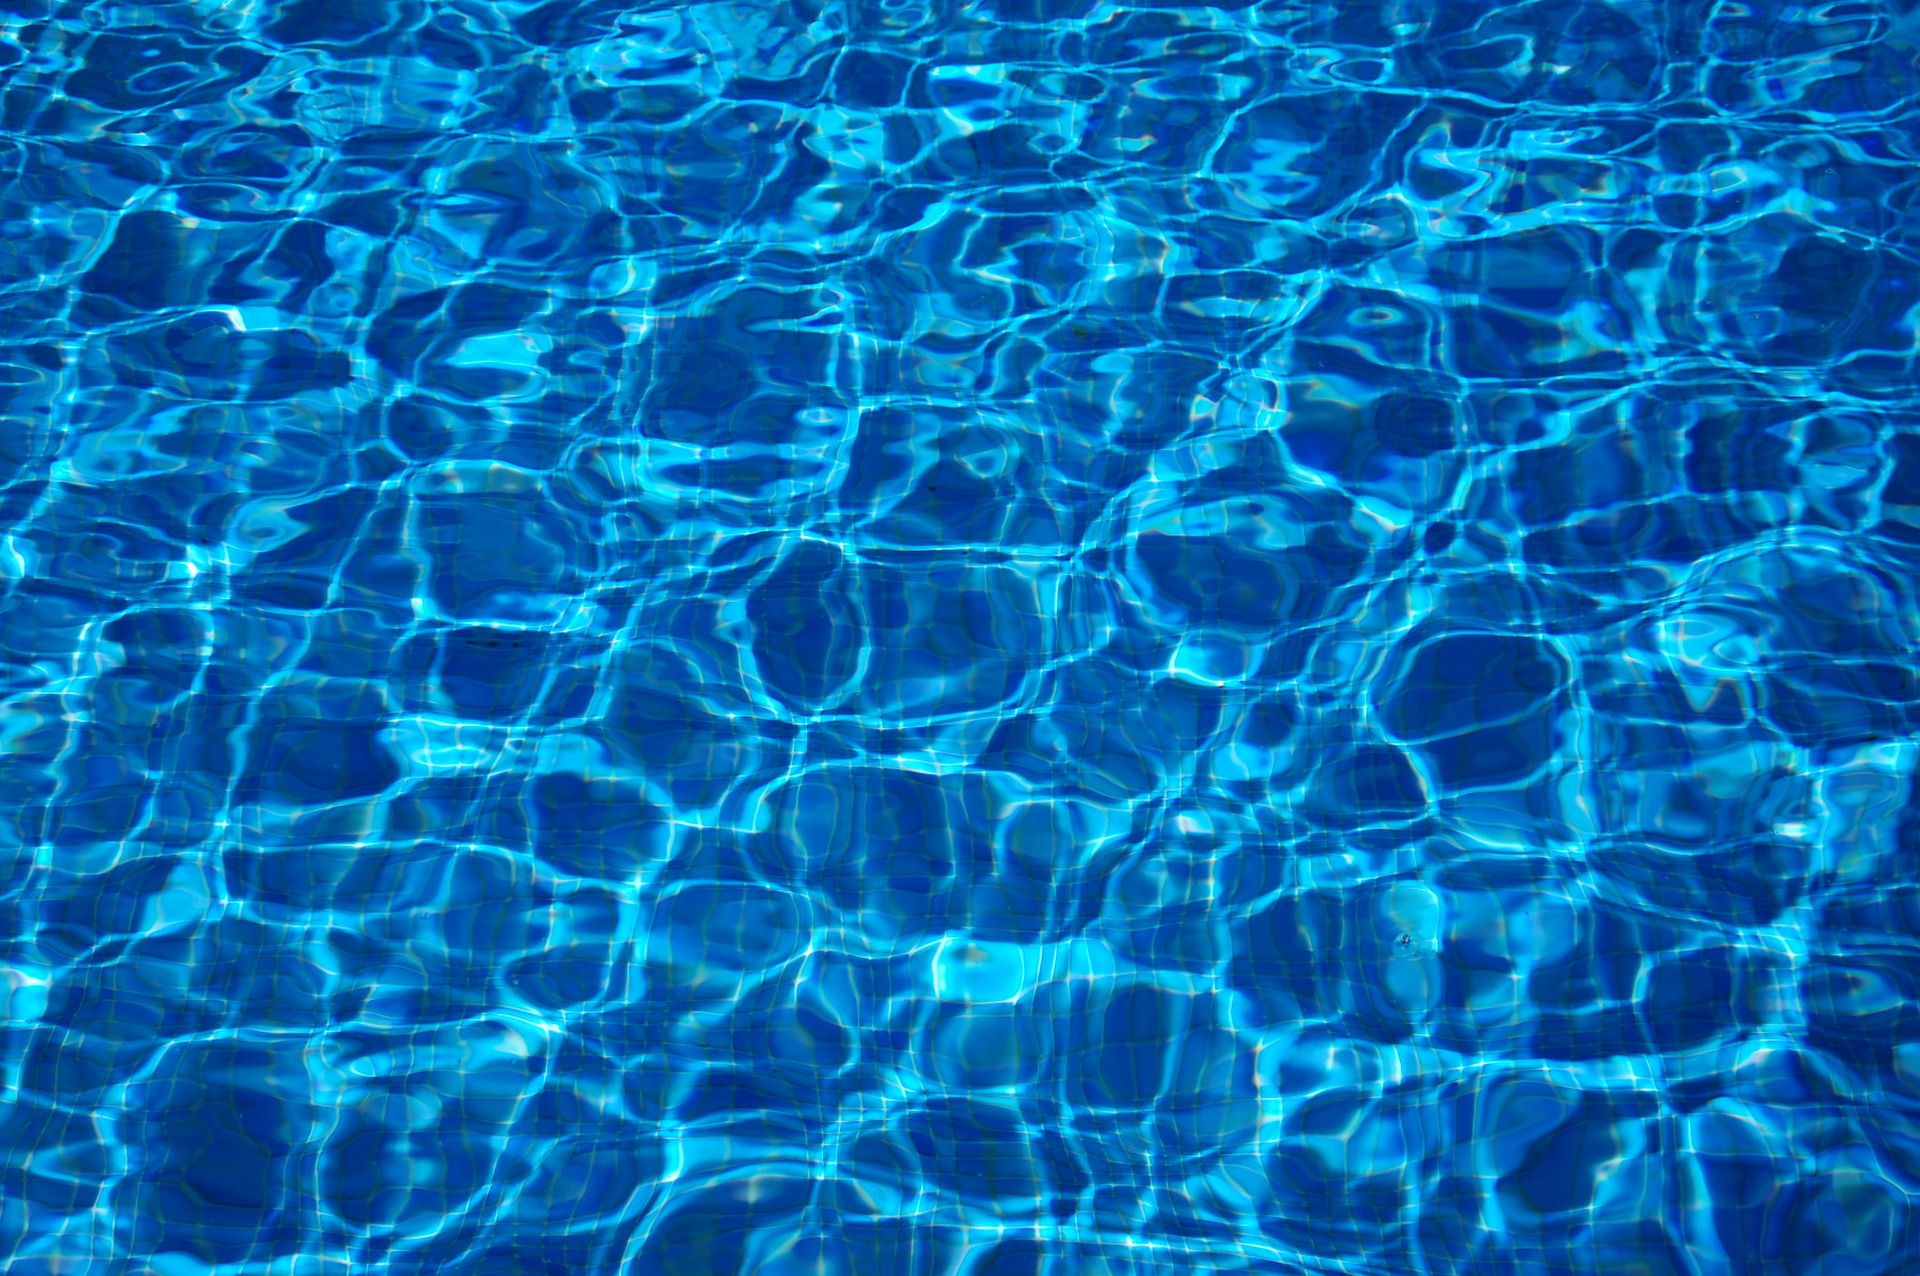 8 SAFETY REMINDERS ABOUT POOL CHEMICALS